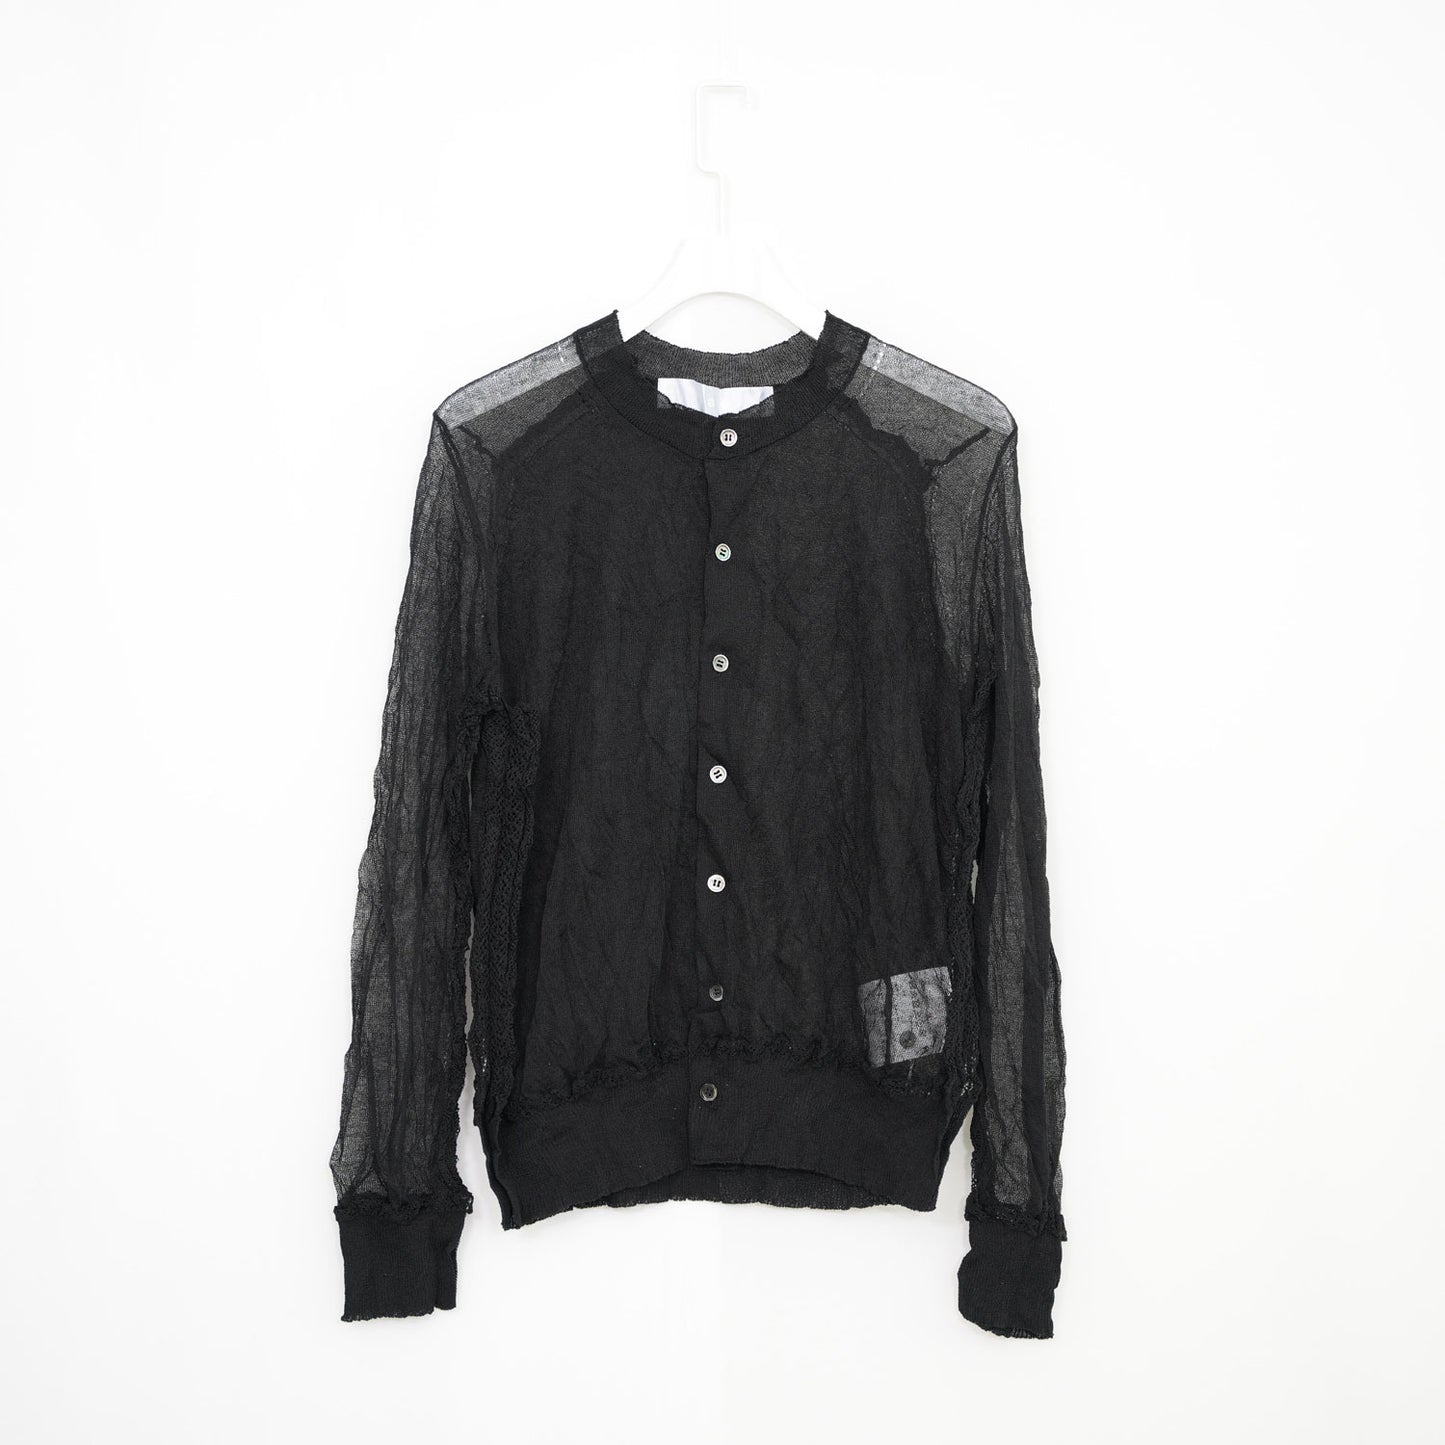 Tao COMME des GARCONS◇半袖カットソー/S/コットン/BLK/総柄：2ｎｄ 